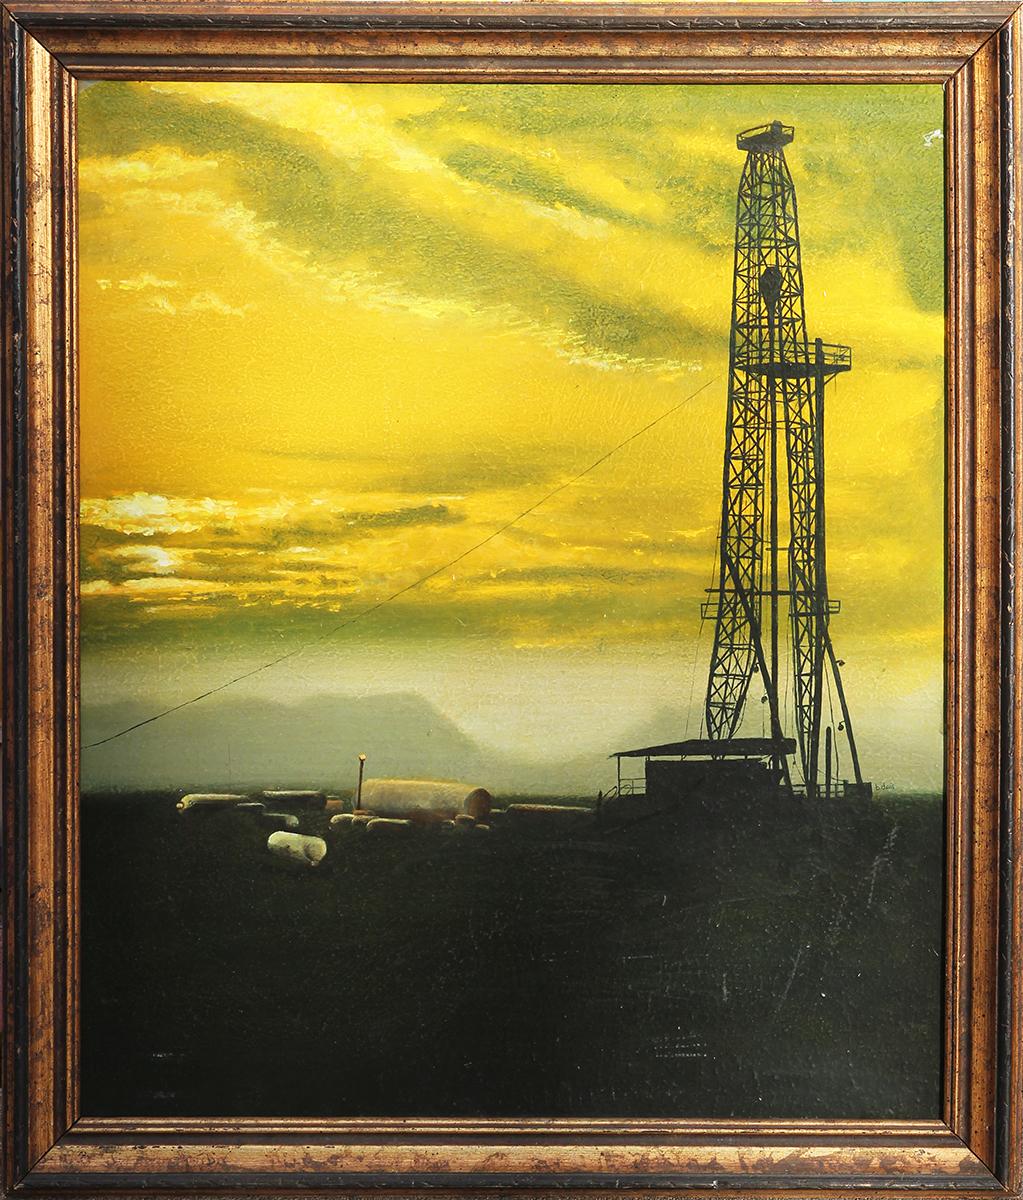 Benjamin Davis Landscape Painting - Green and Yellow Texas Oil Plant Sunset Silhouette Painting